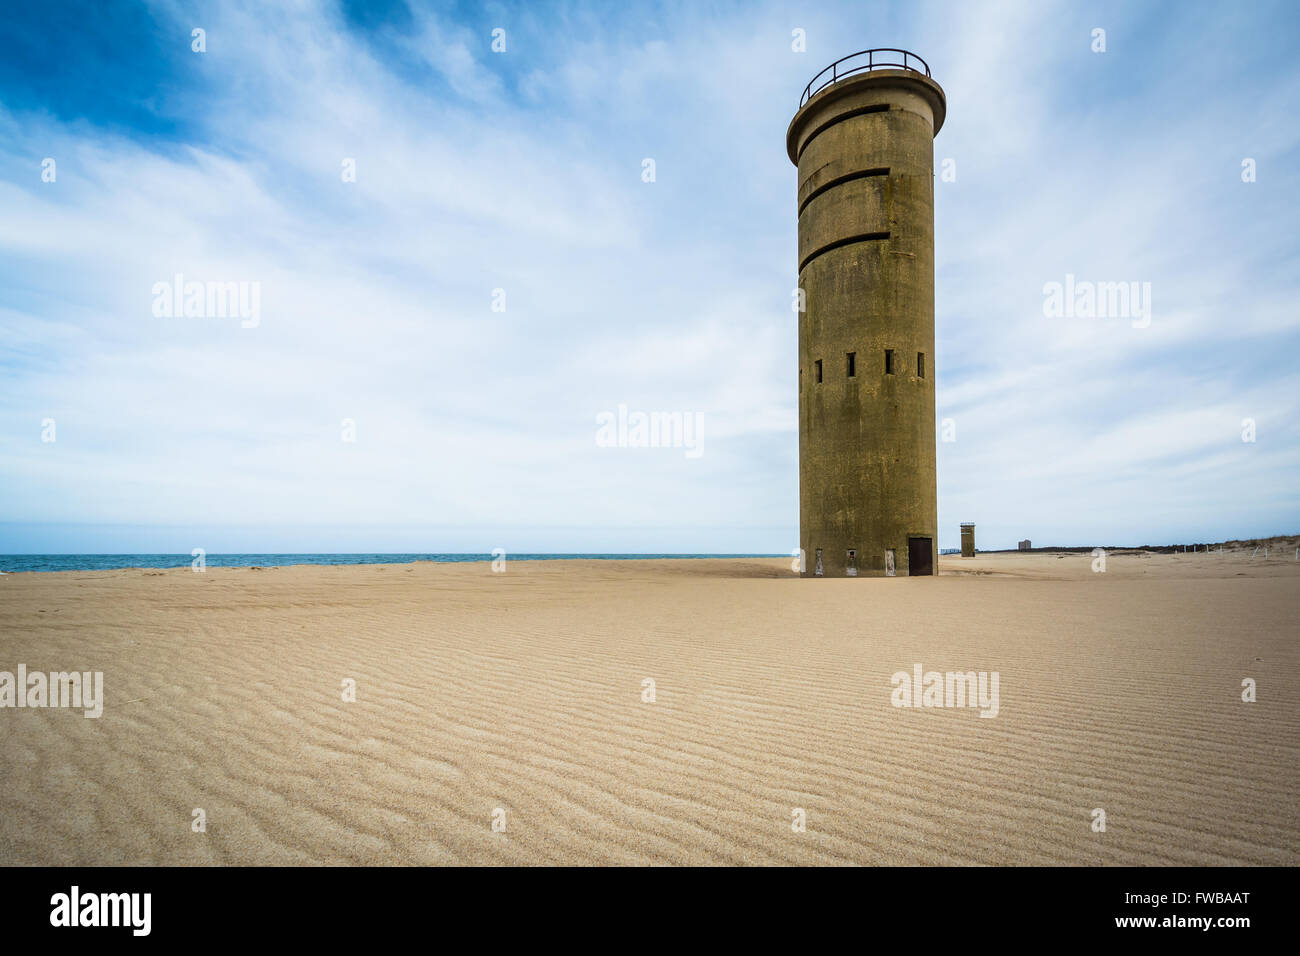 World War II Observation Tower at Cape Henlopen State Park in Rehoboth Beach, Delaware. Stock Photo